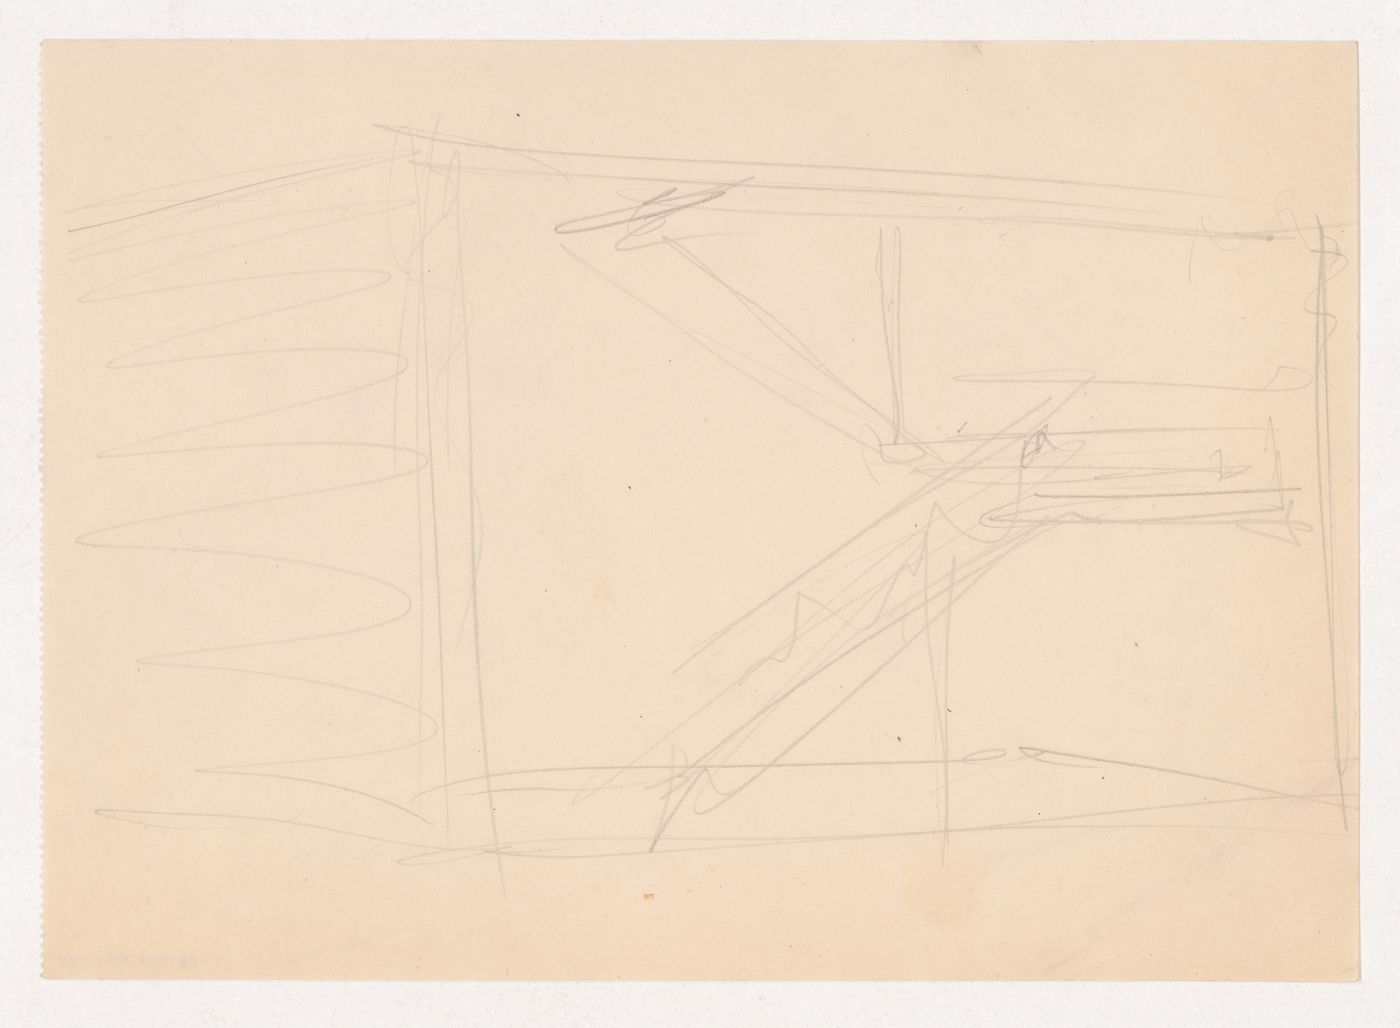 Perspective sketch for stairs for the Metallurgy Building, Illinois Institute of Technology, Chicago